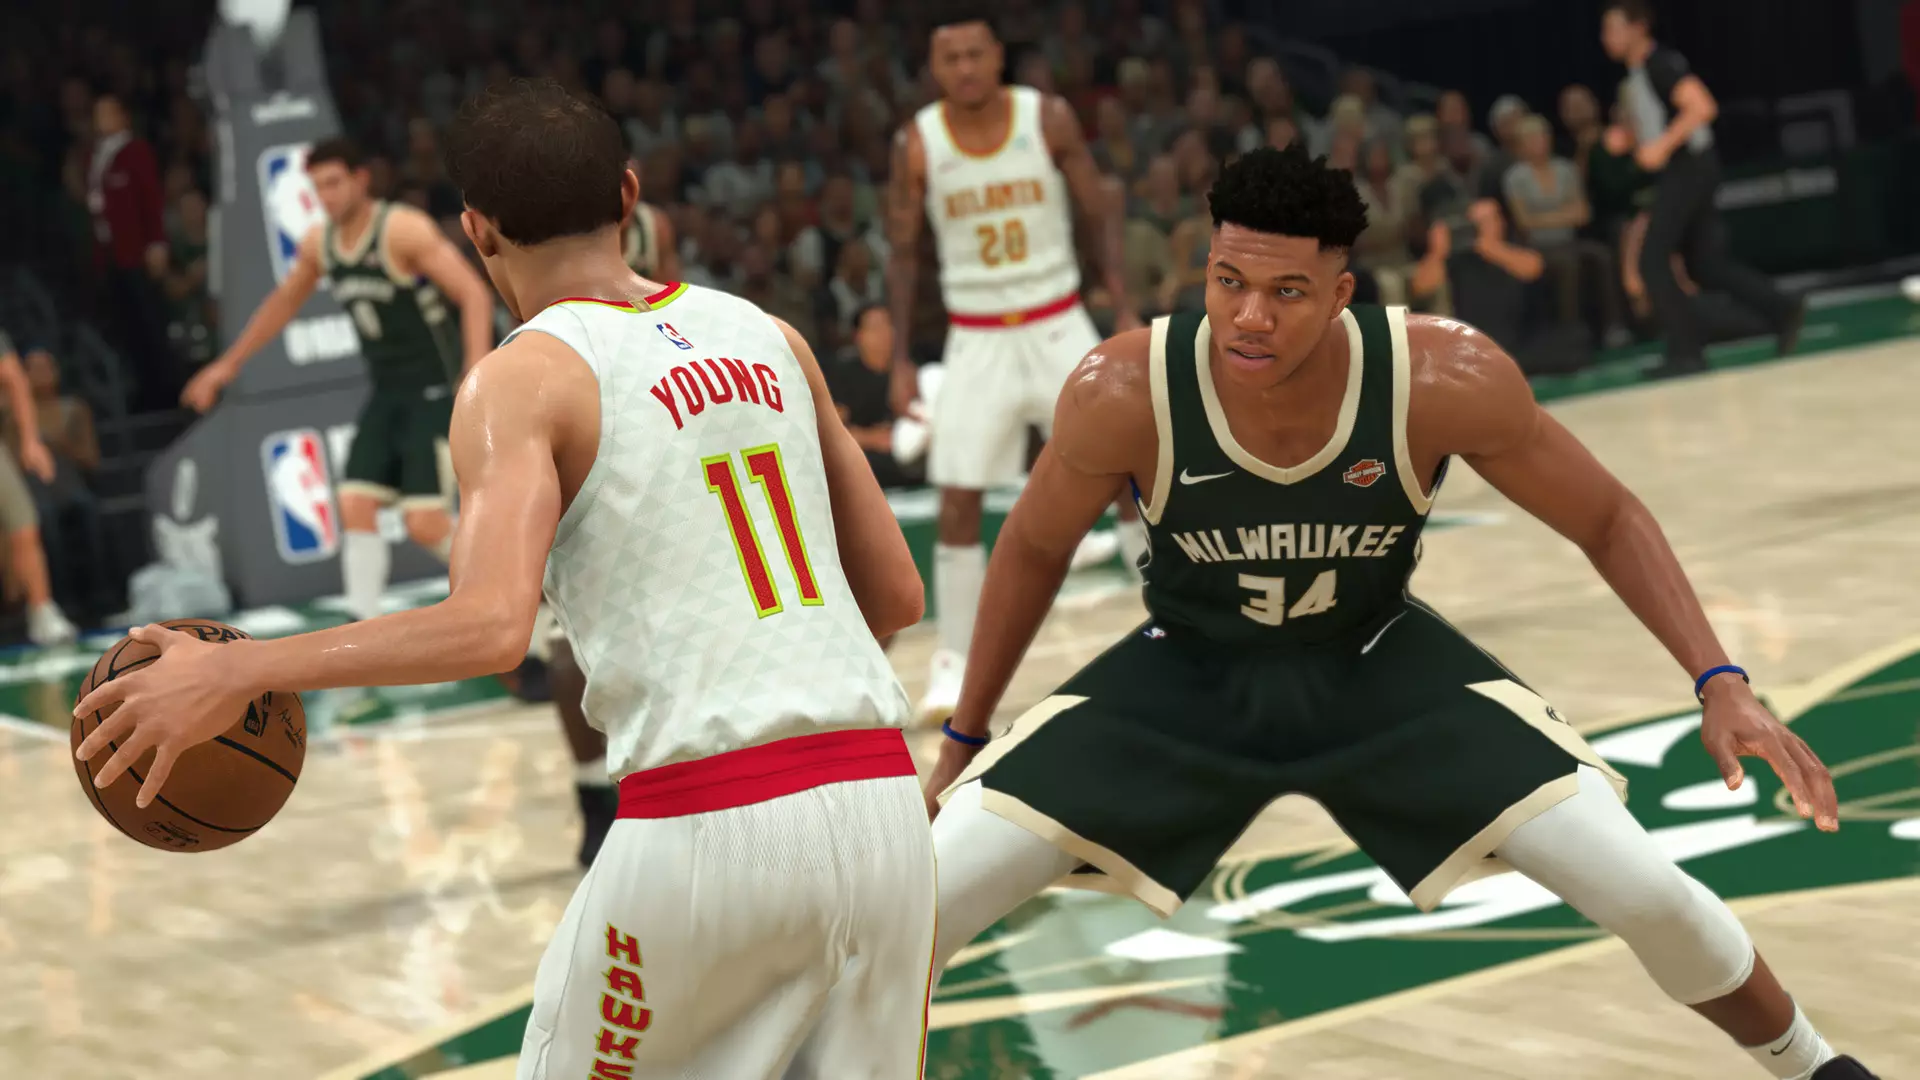 The game features improved user experience including ball handling, jump shots, layups and dunks.